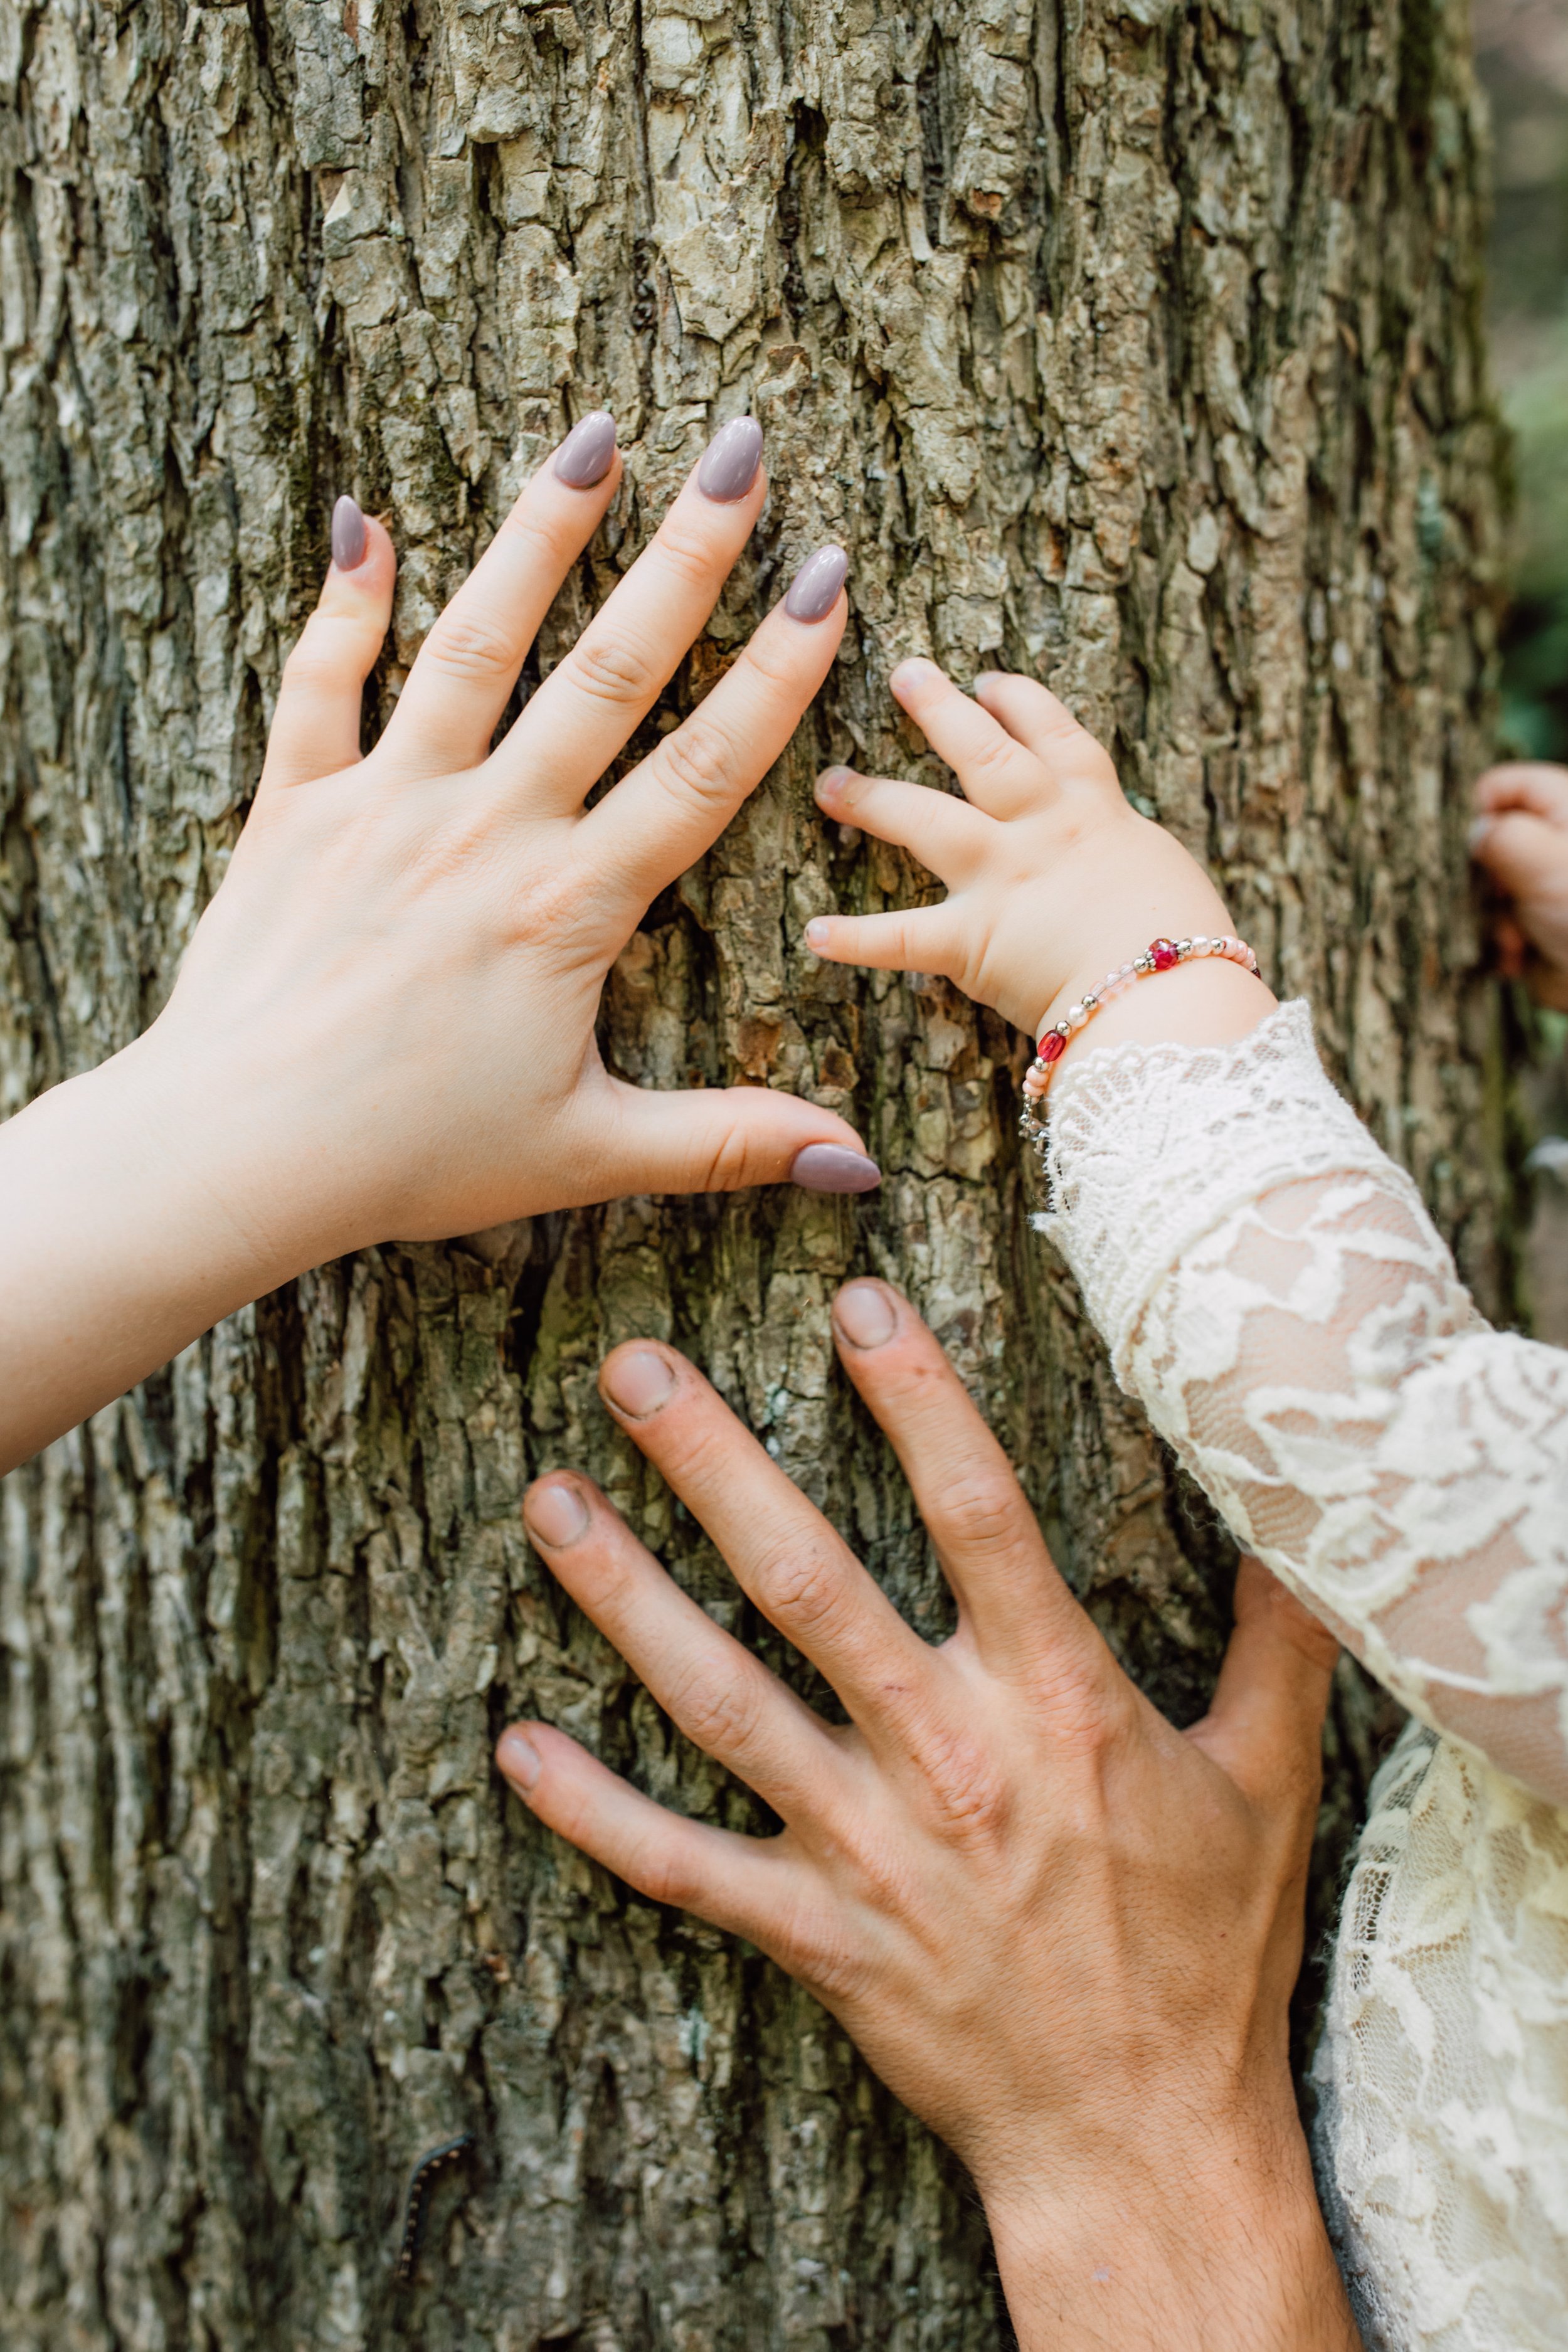  Mom, dad, and baby hold their hands against a tree at tinker falls on a family adventure 